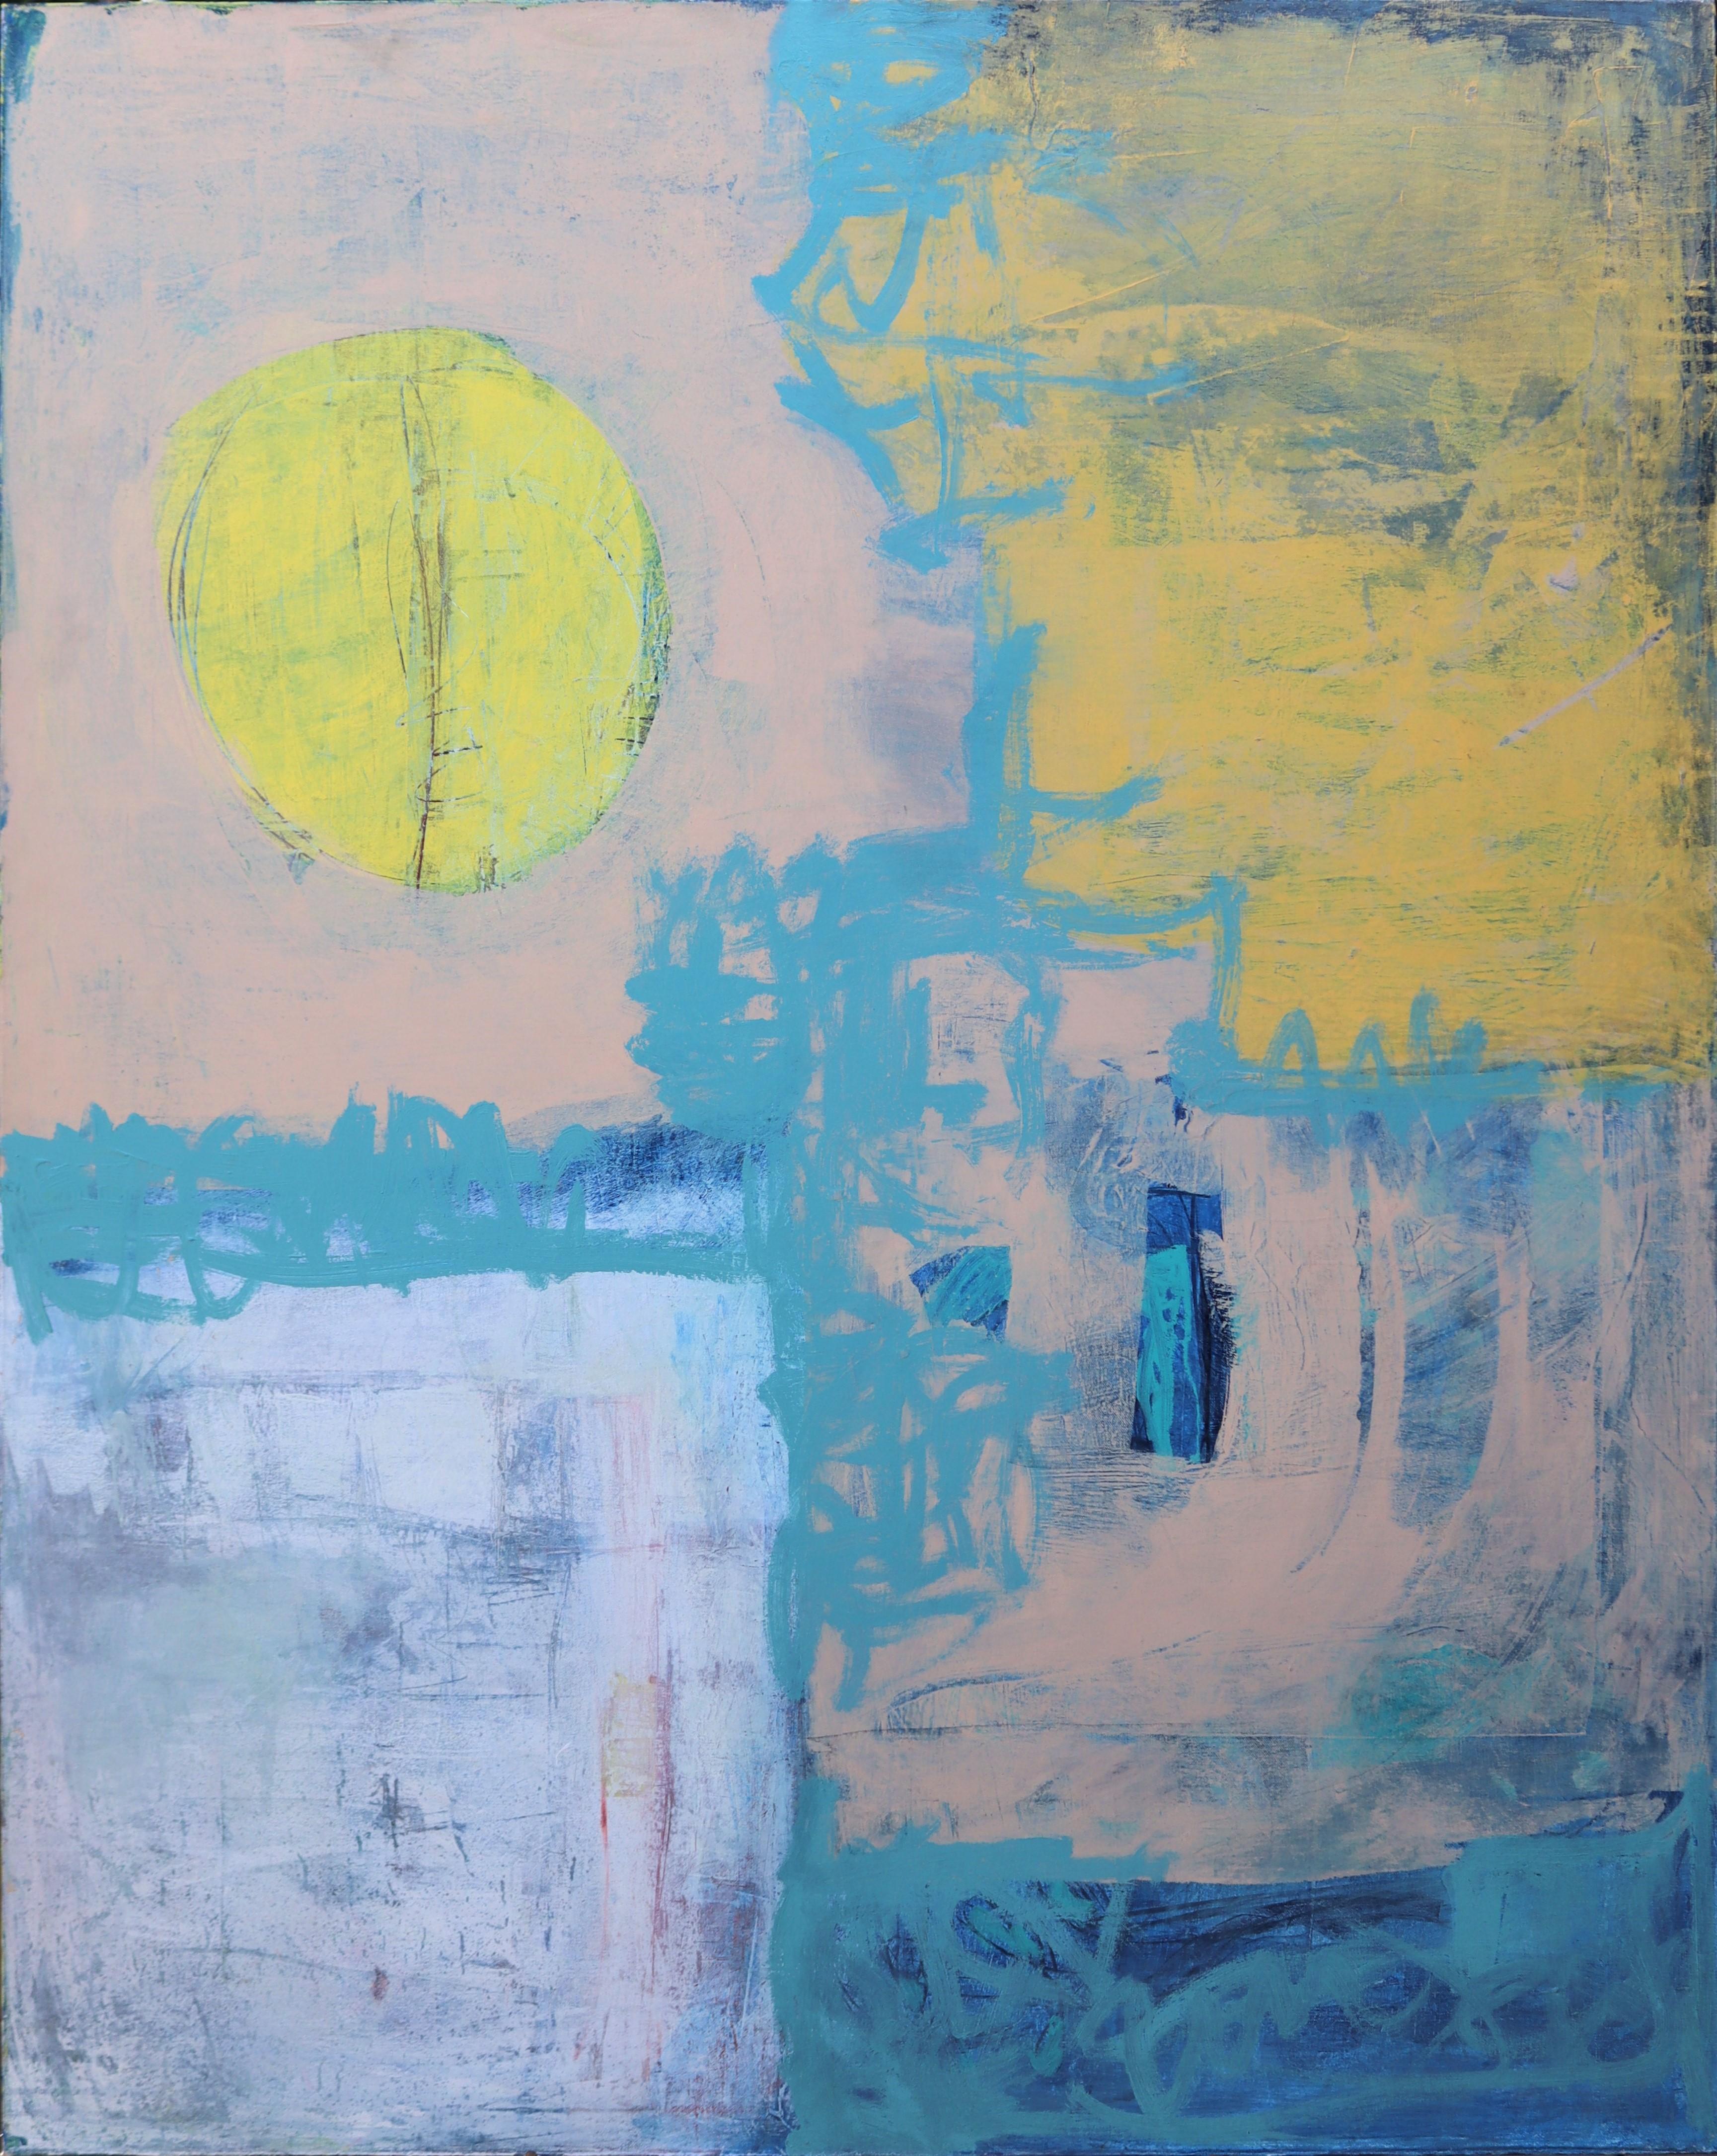 Tom Reno - "Abstract with Yellow Sun" Large Abstract Blue Pink Yellow  Gestural Geometric For Sale at 1stDibs